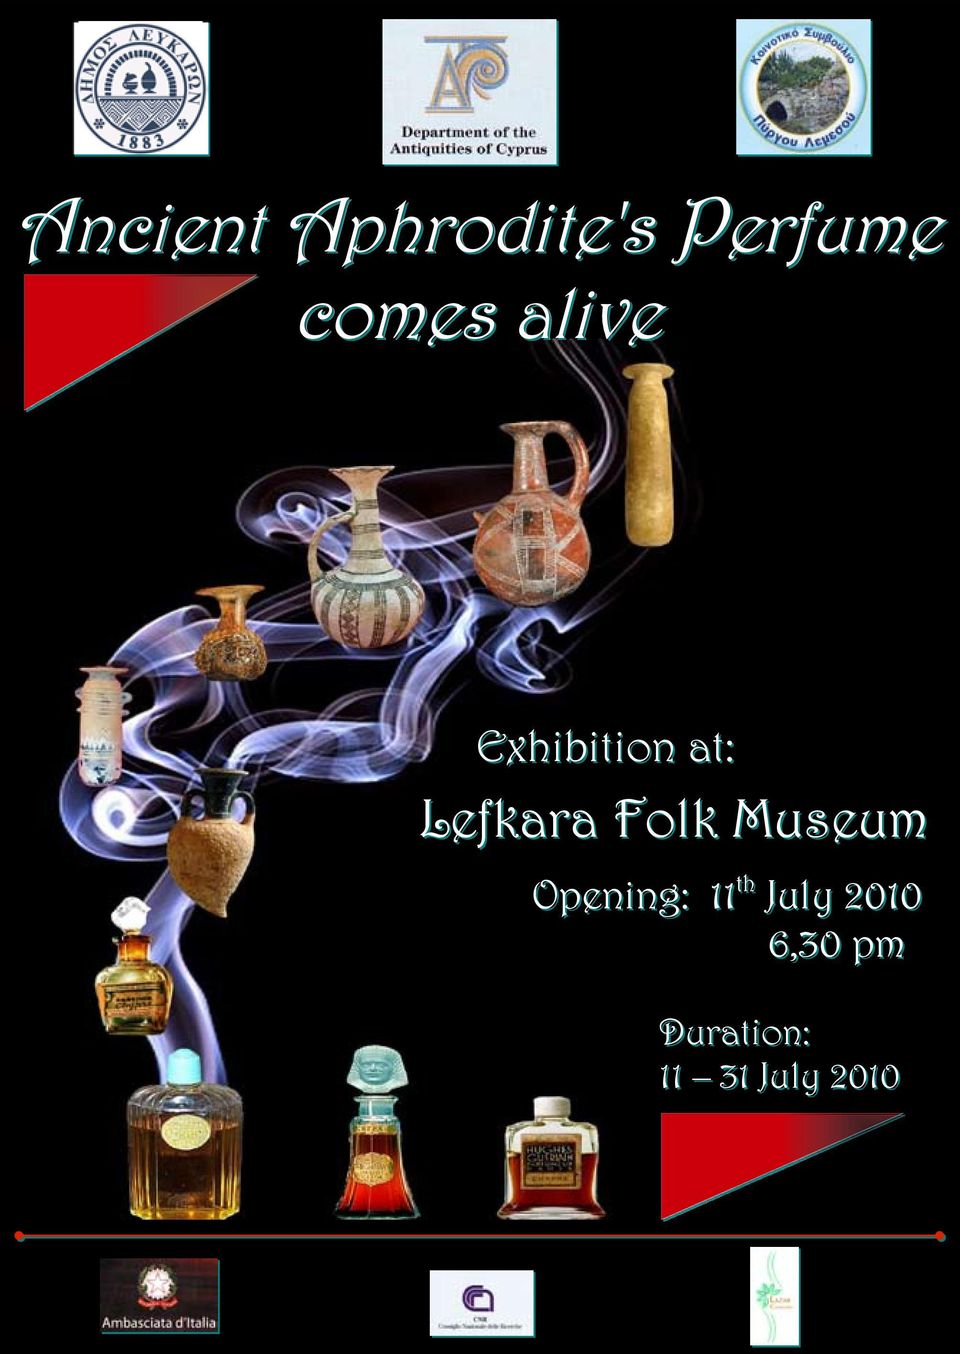 Museum Opening: 11 th July 2010